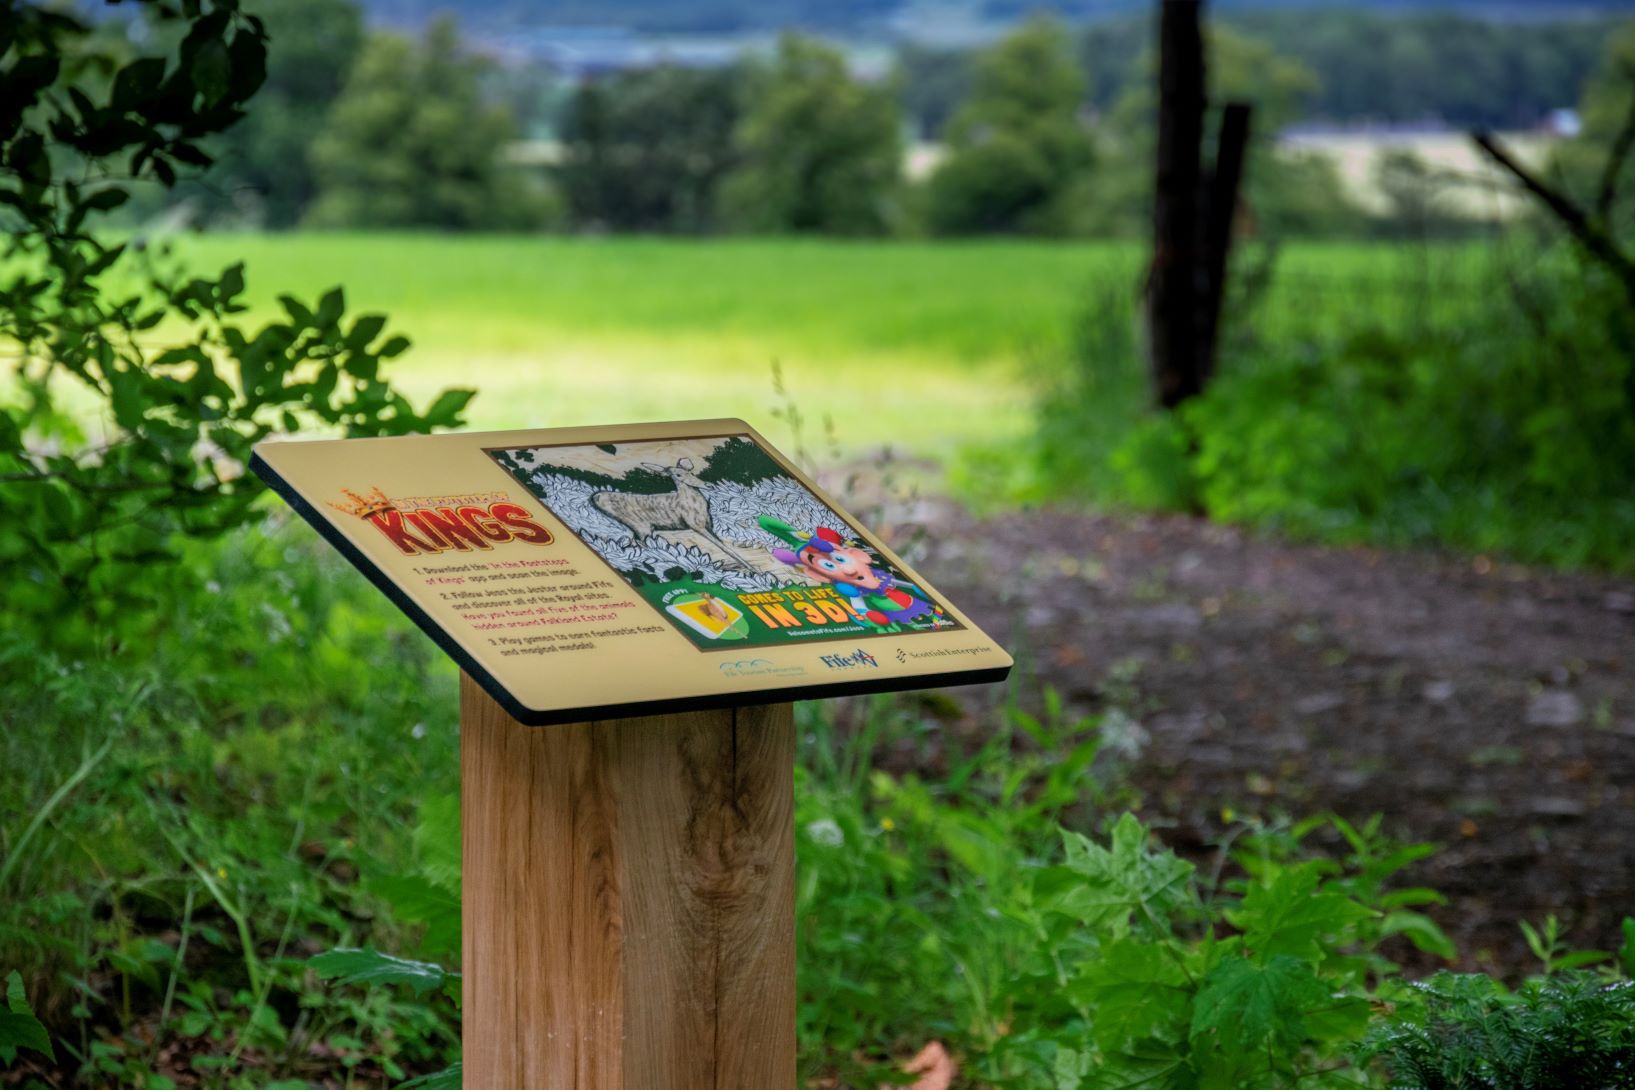 Follow the augmented reality trail and bring history to life